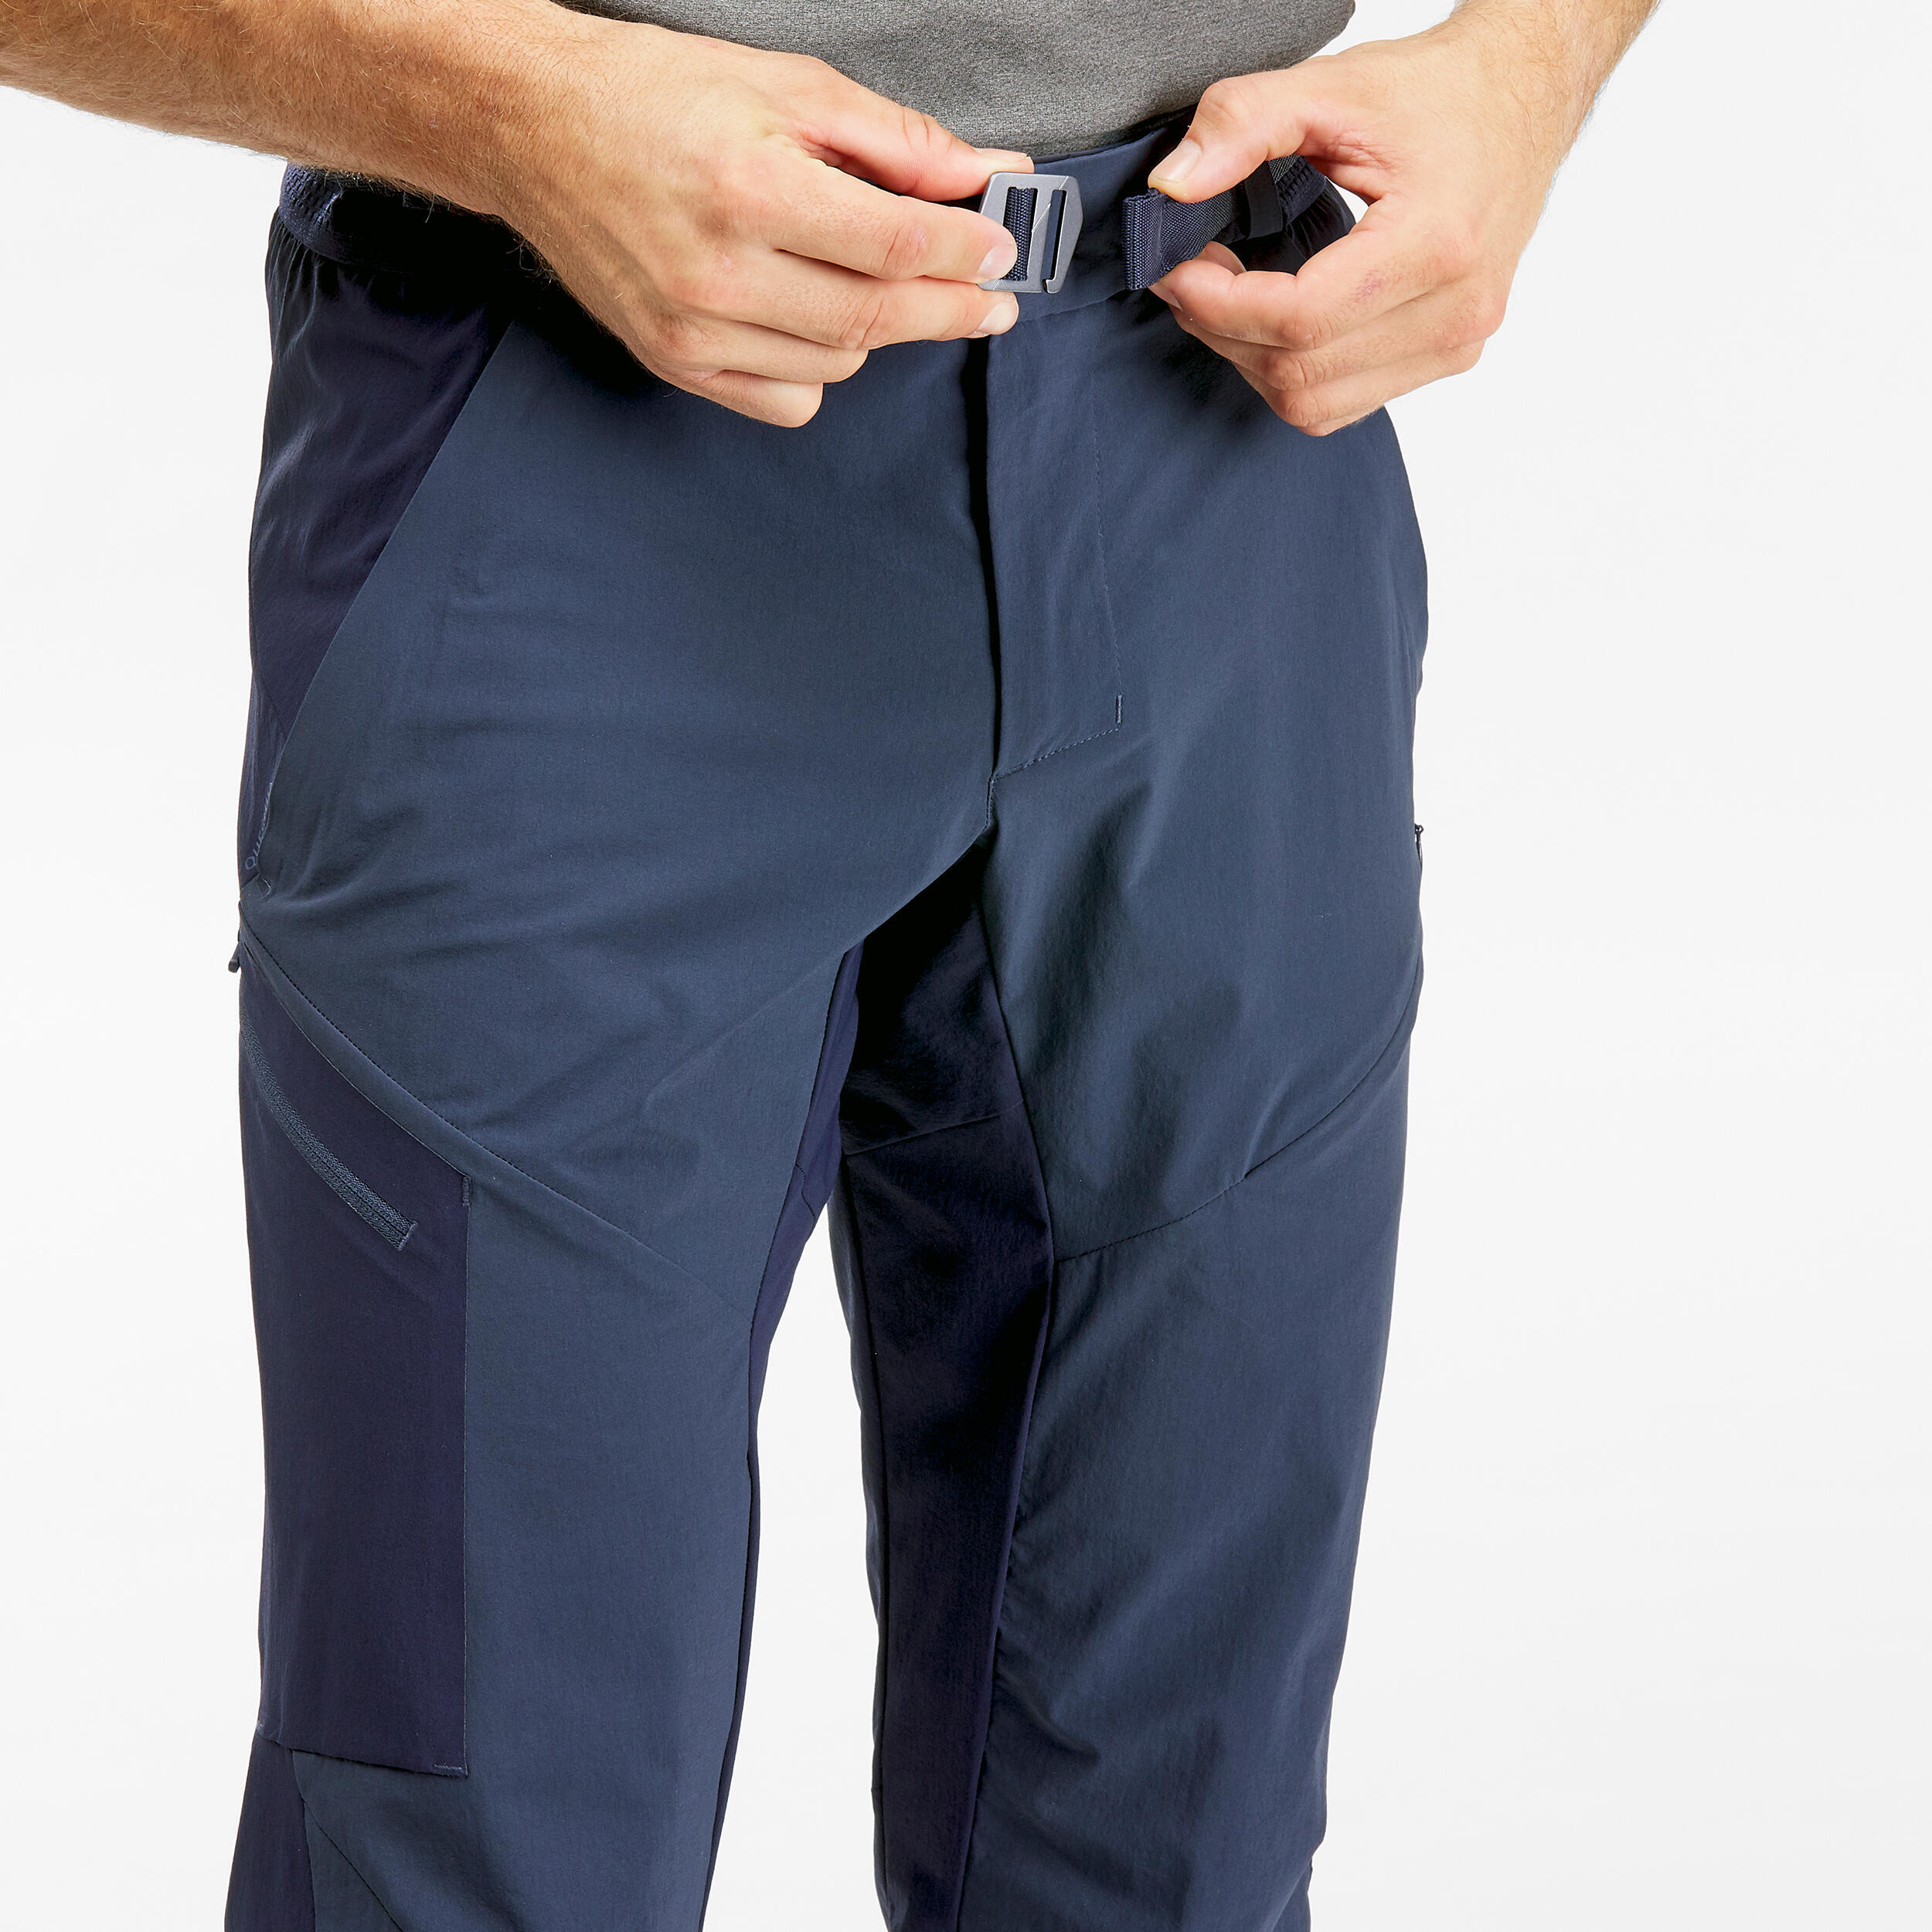 Men's Hiking Trousers MH500 6/9